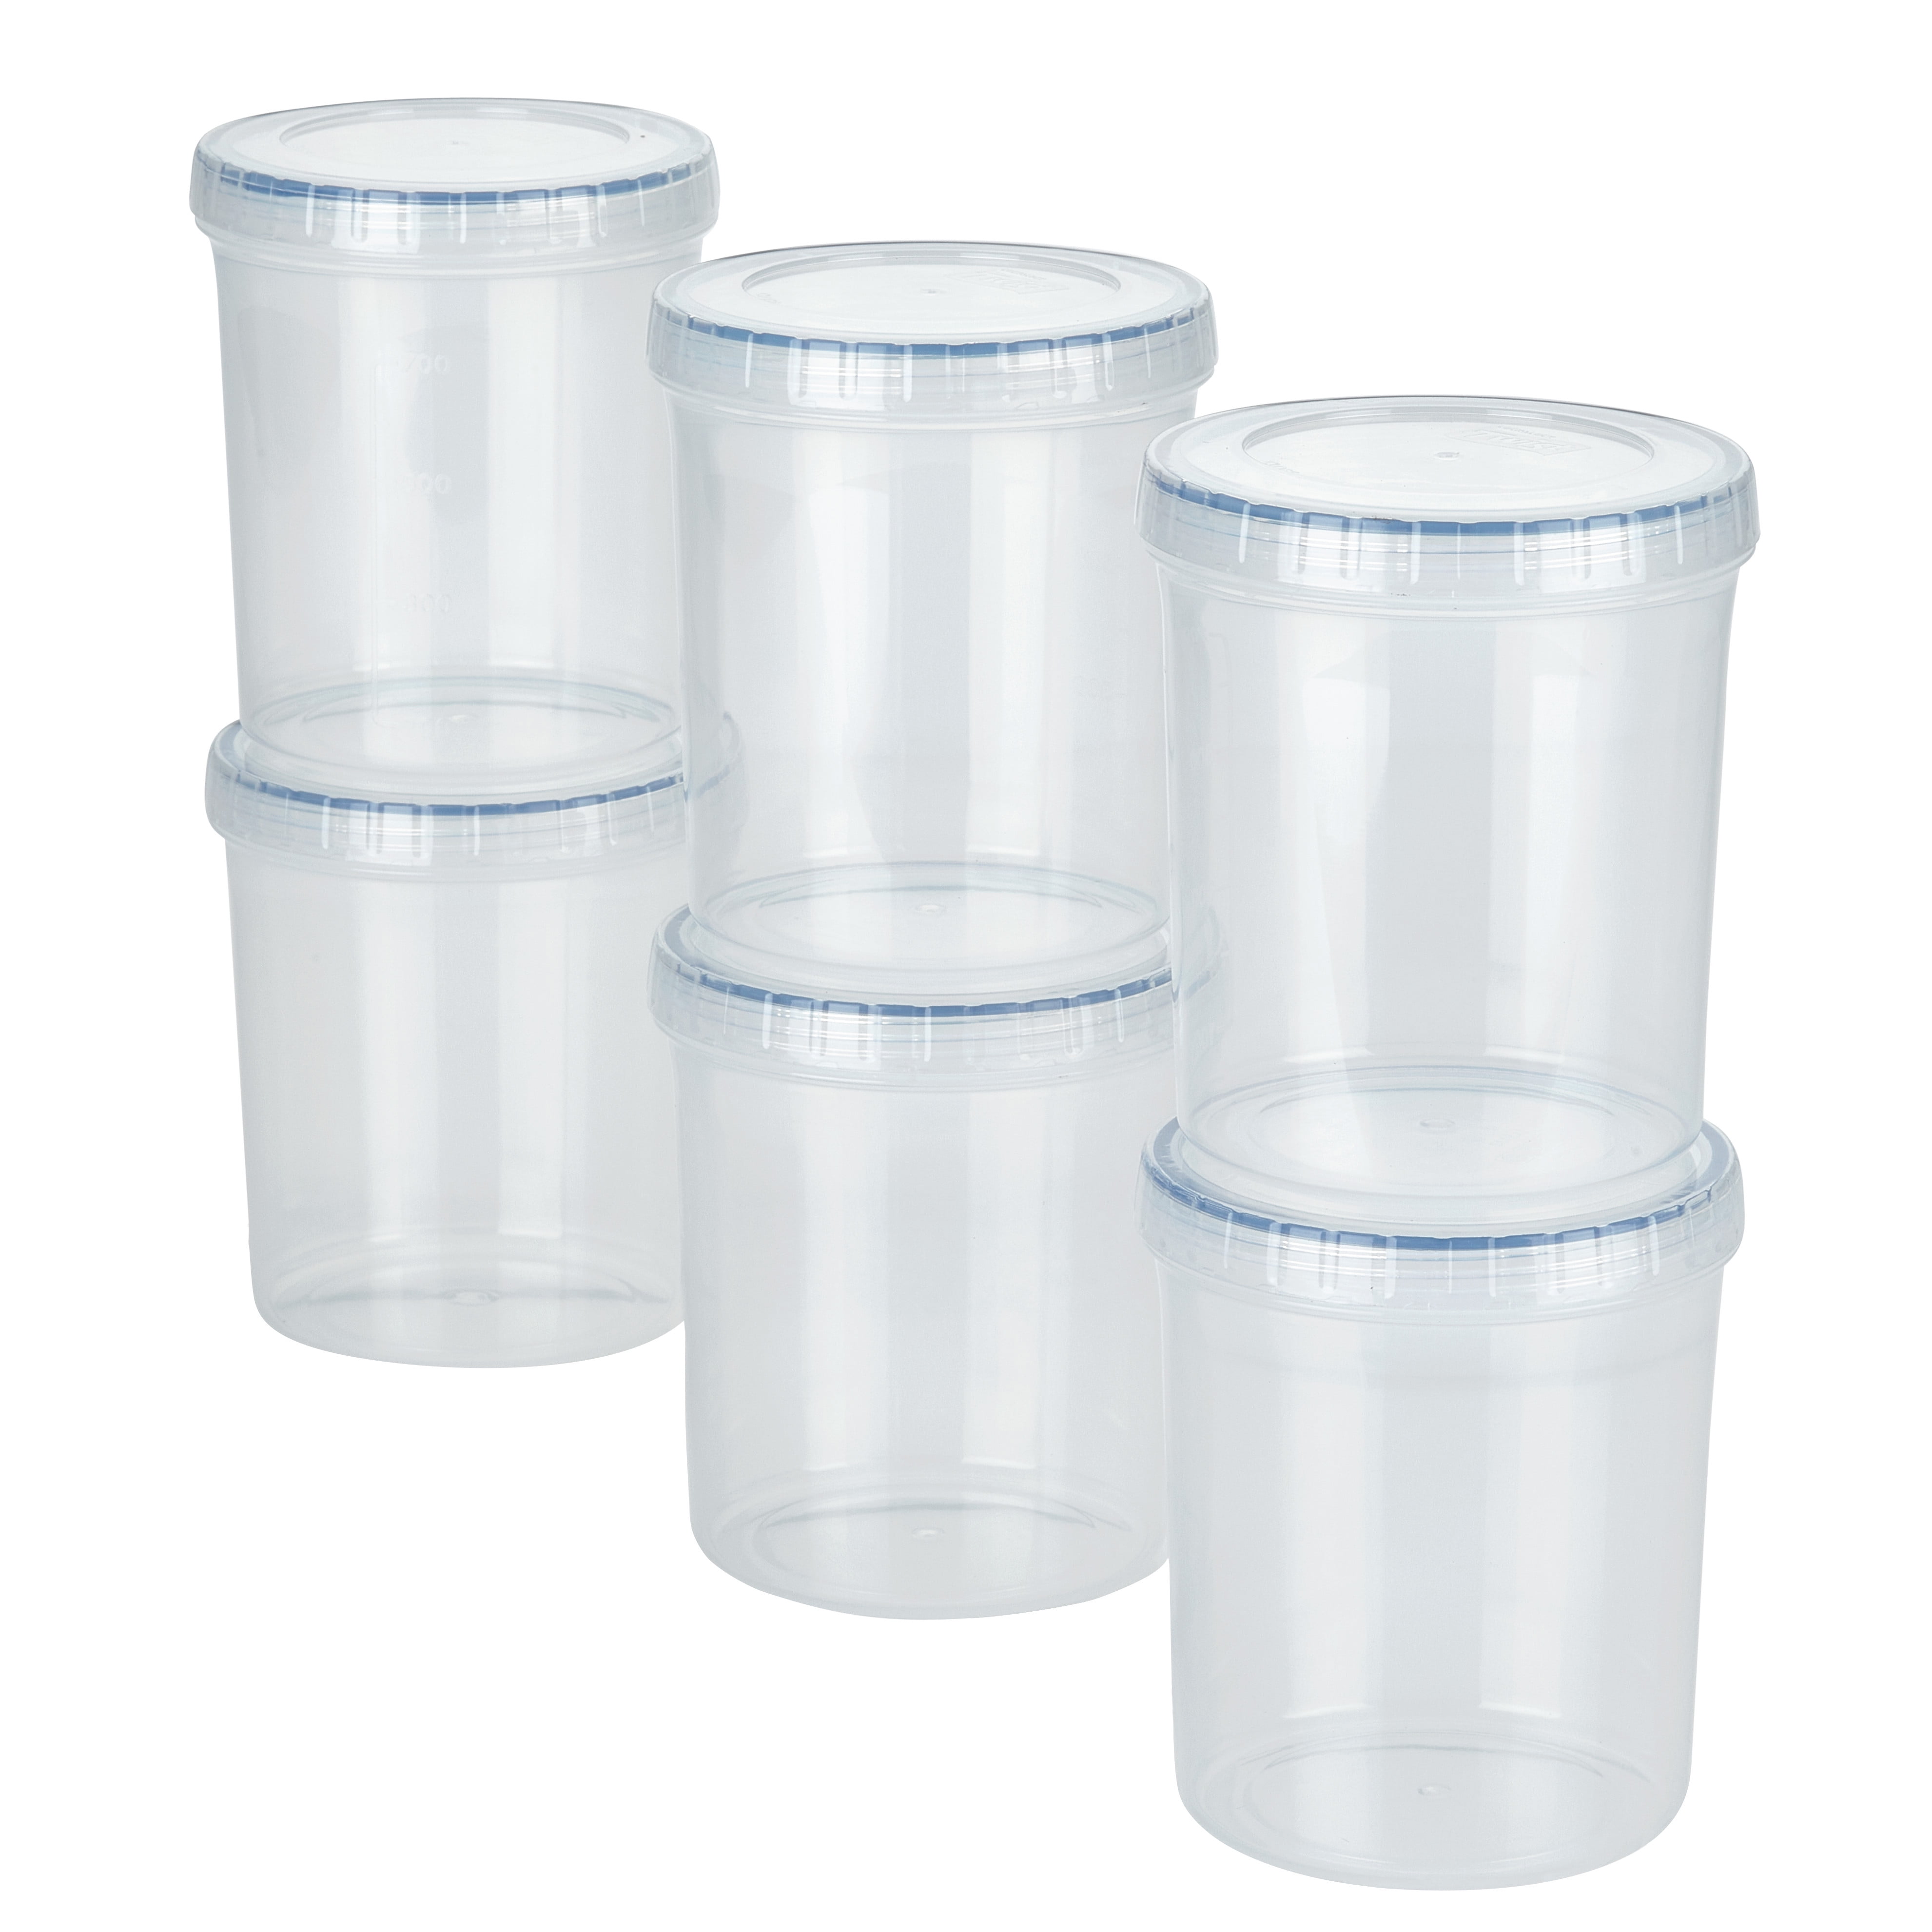 LOCK & LOCK Easy Essentials Twist Food Storage lids/Airtight containers,  BPA Free, Tall-44 oz-for Pasta, Clear